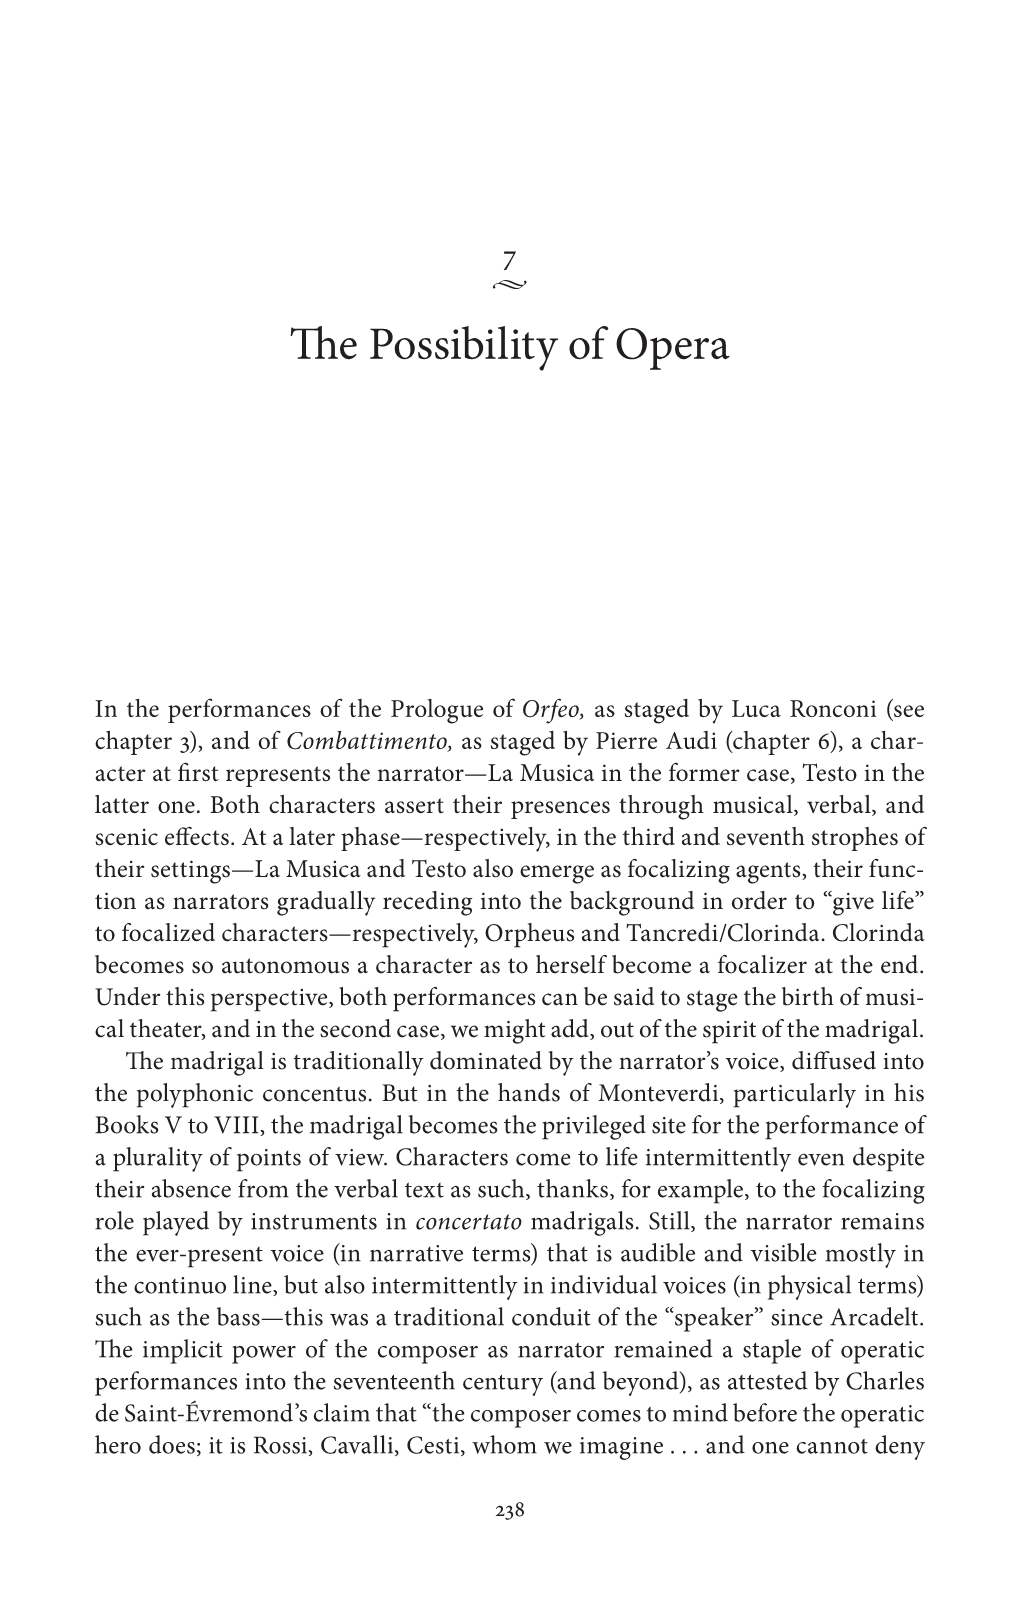 The Possibility of Opera